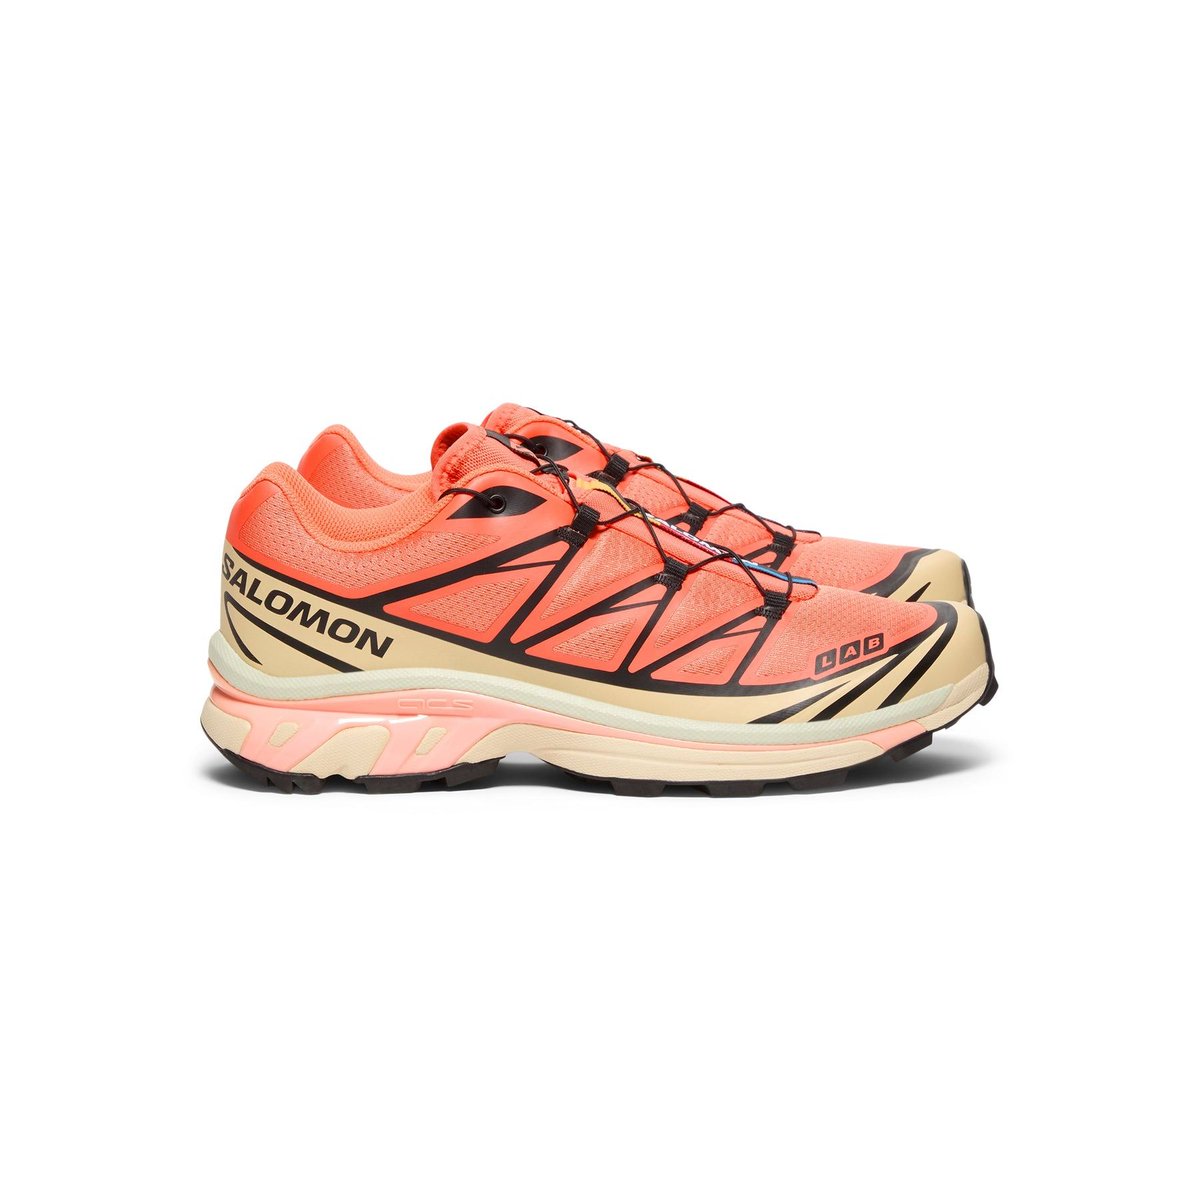 Ad: NEW via CNCPTS
Salomon XT-6 'Living Coral/Cement'
$200 + Shipping

>> bit.ly/4bJH80H